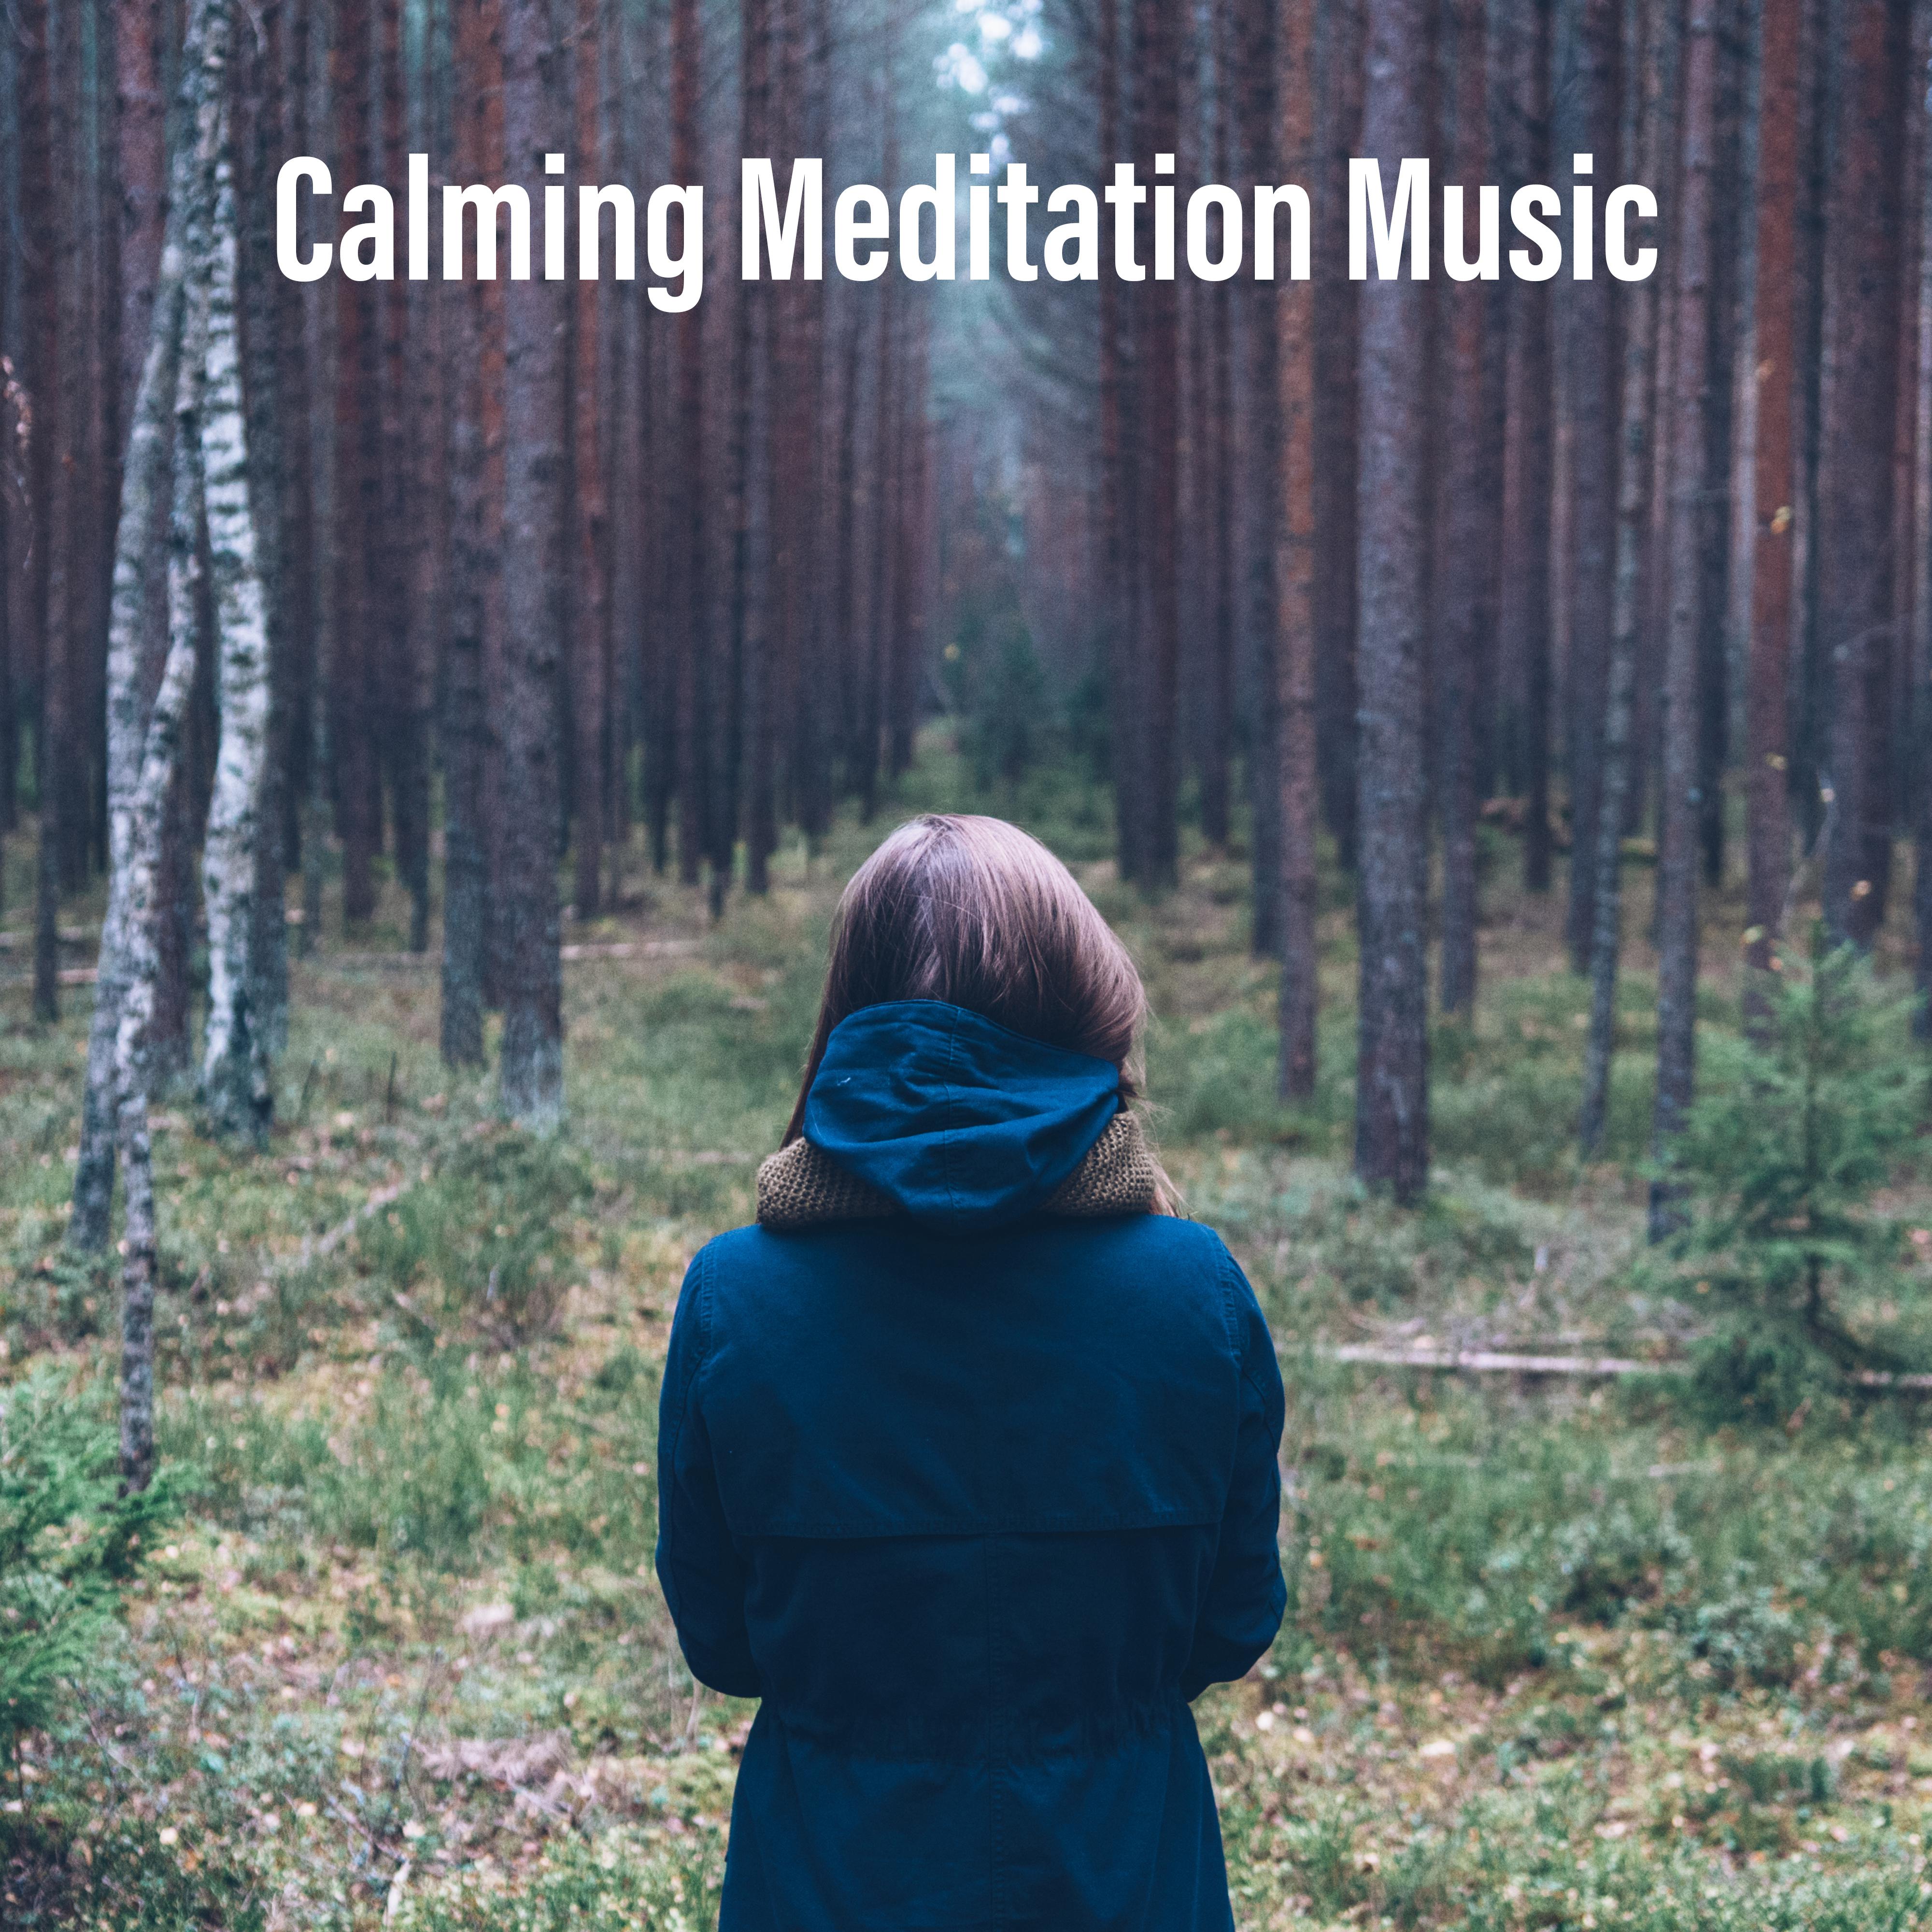 Calming Meditation Music – Soft Sounds to Relax, Rest with New Age Music, Soothing Waves, Inner Journey